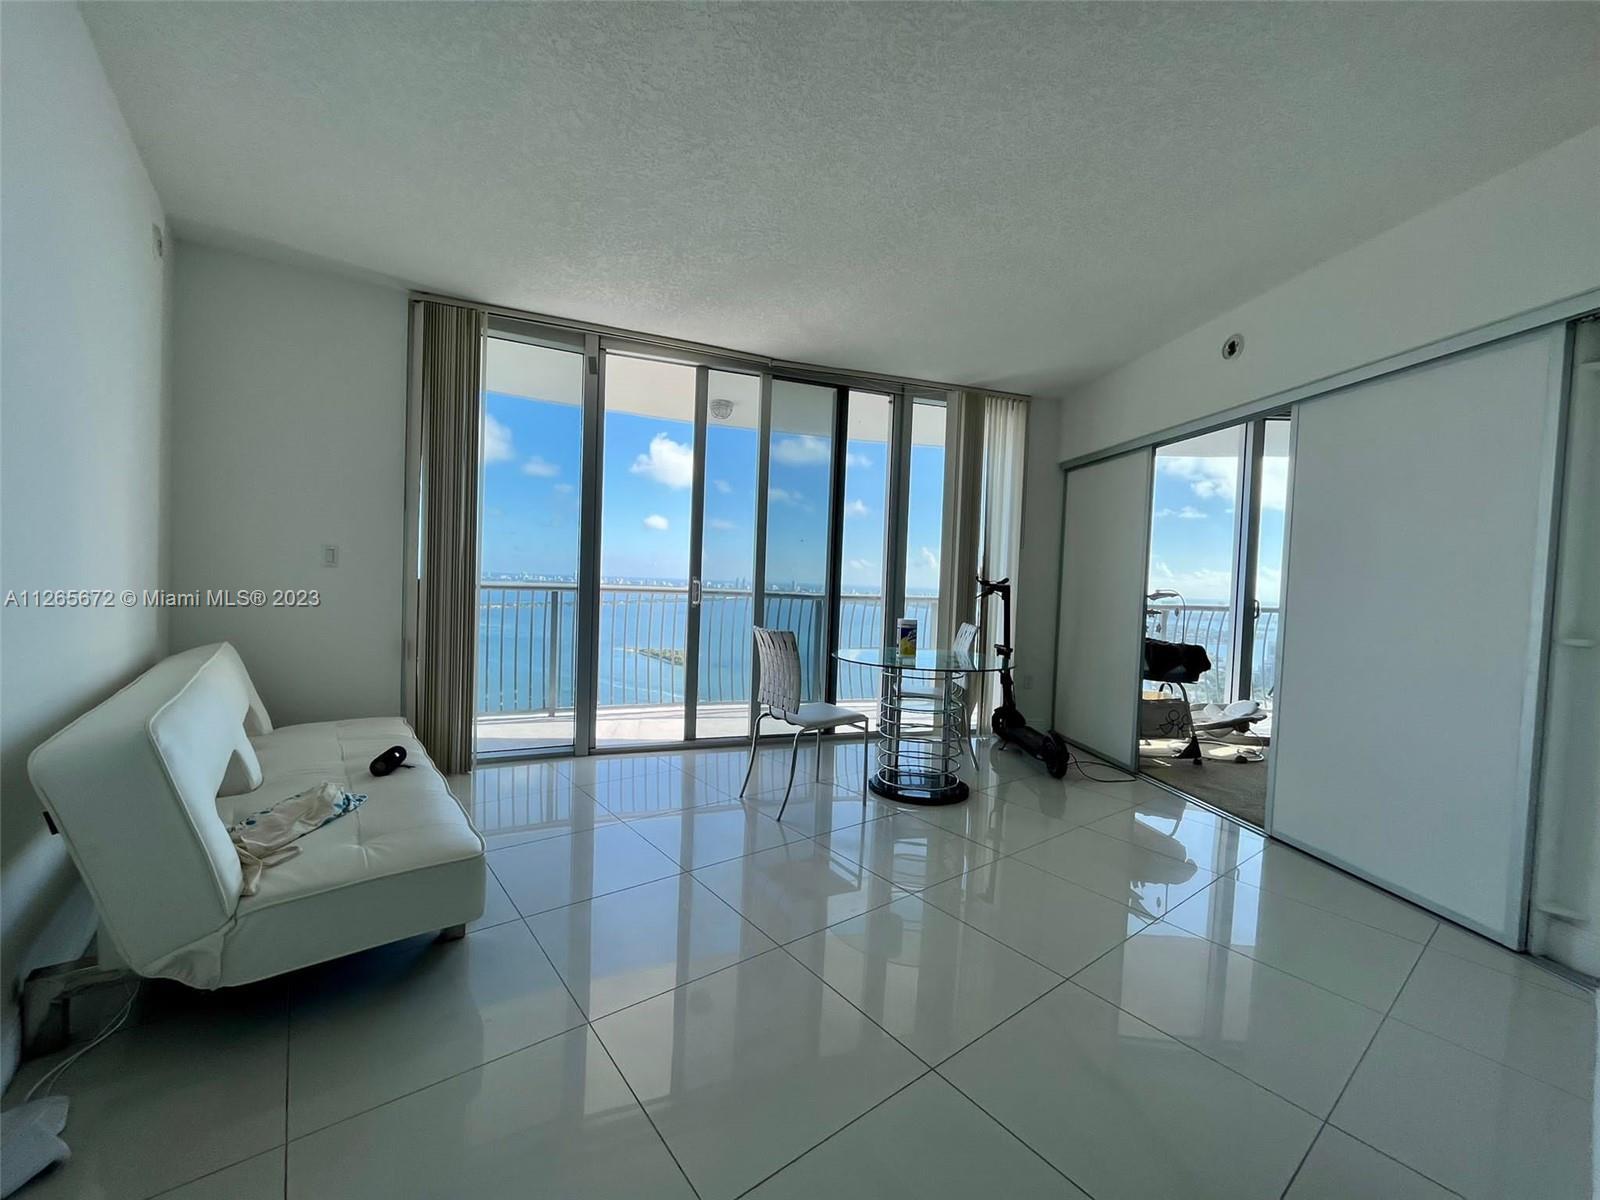 Spectacular 2/2 unit with unobstructed Bay, Ocean, and Downtown skyline views!
Enjoy a full-length 